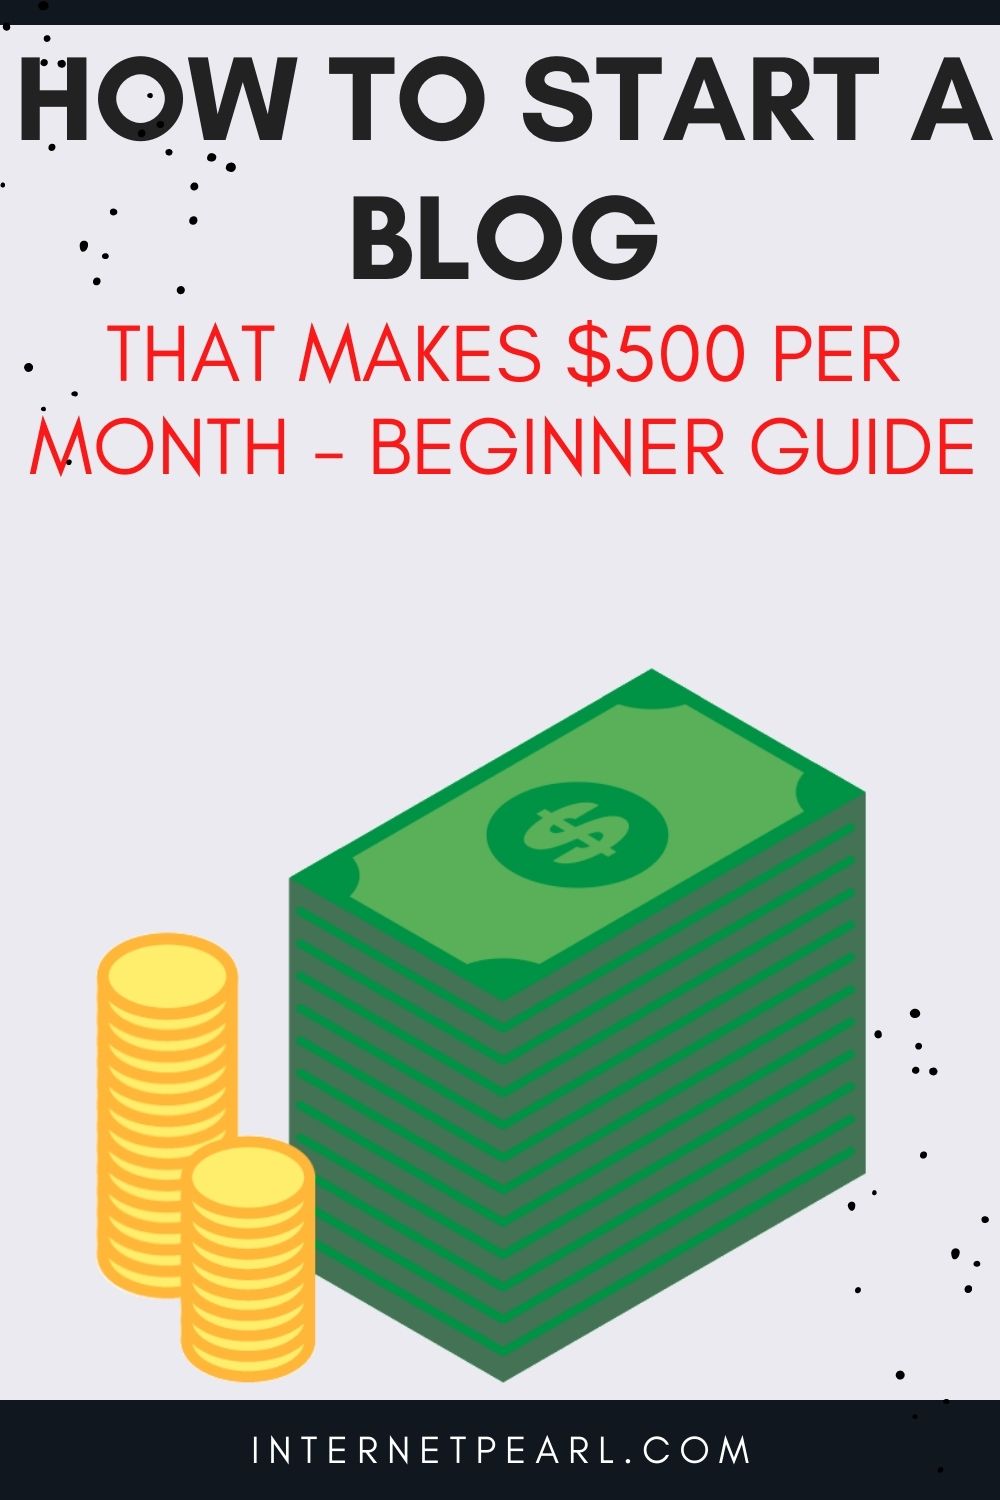 How to start a blog that make money right away.